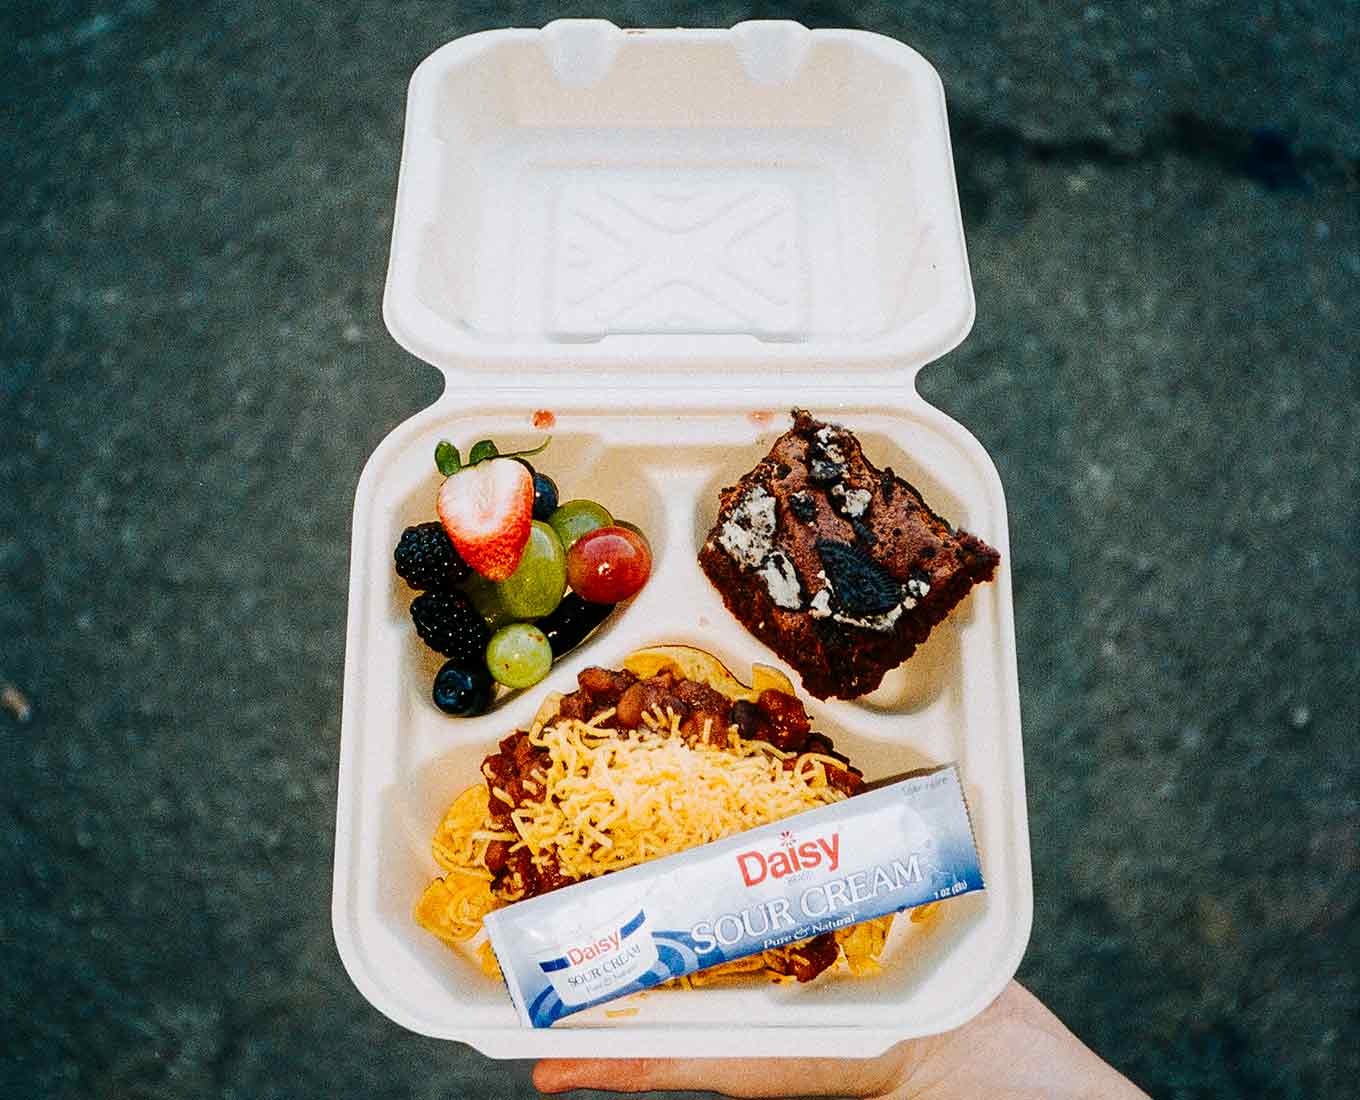 A to-go container is filled with tacos, fruit, and dessert.